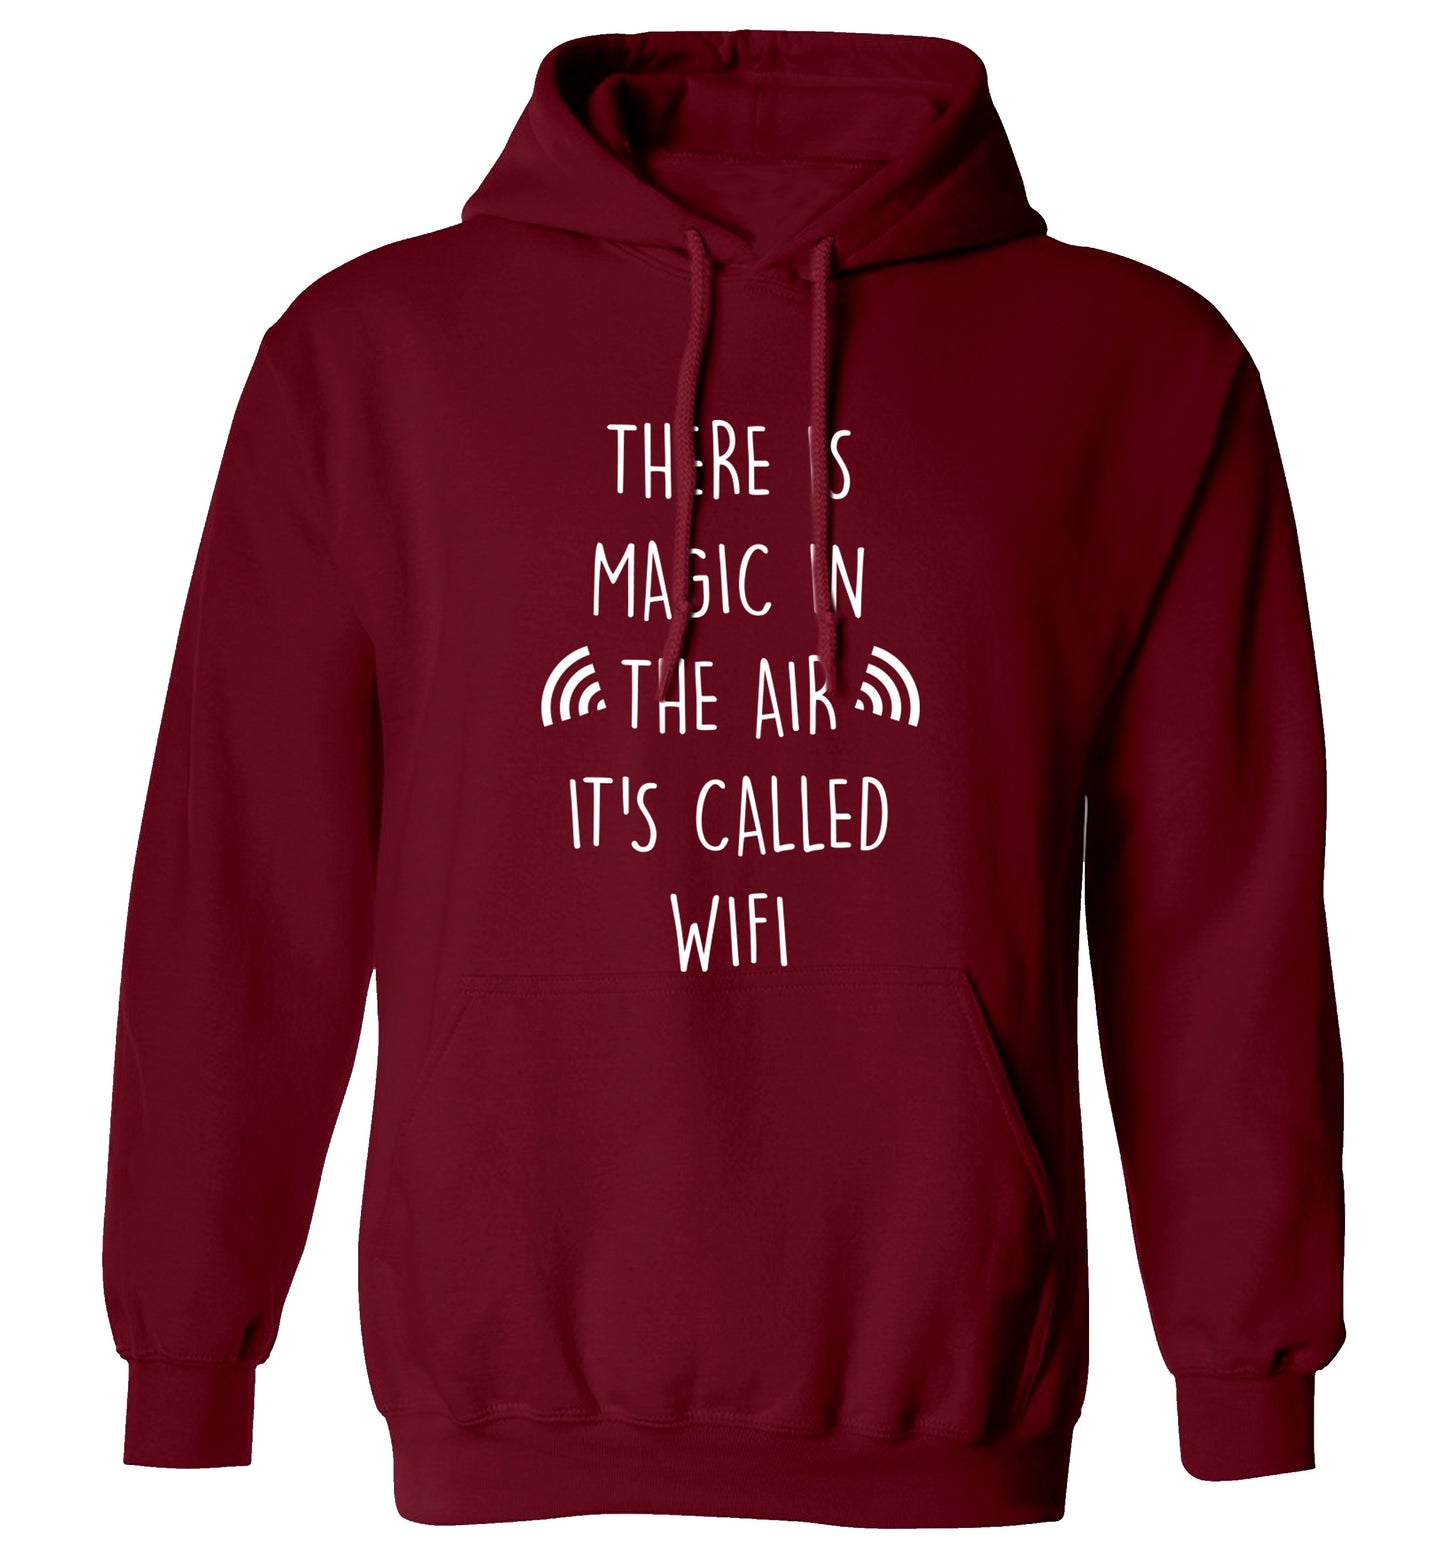 There is magic in the air it's called wifi adults unisex maroon hoodie 2XL